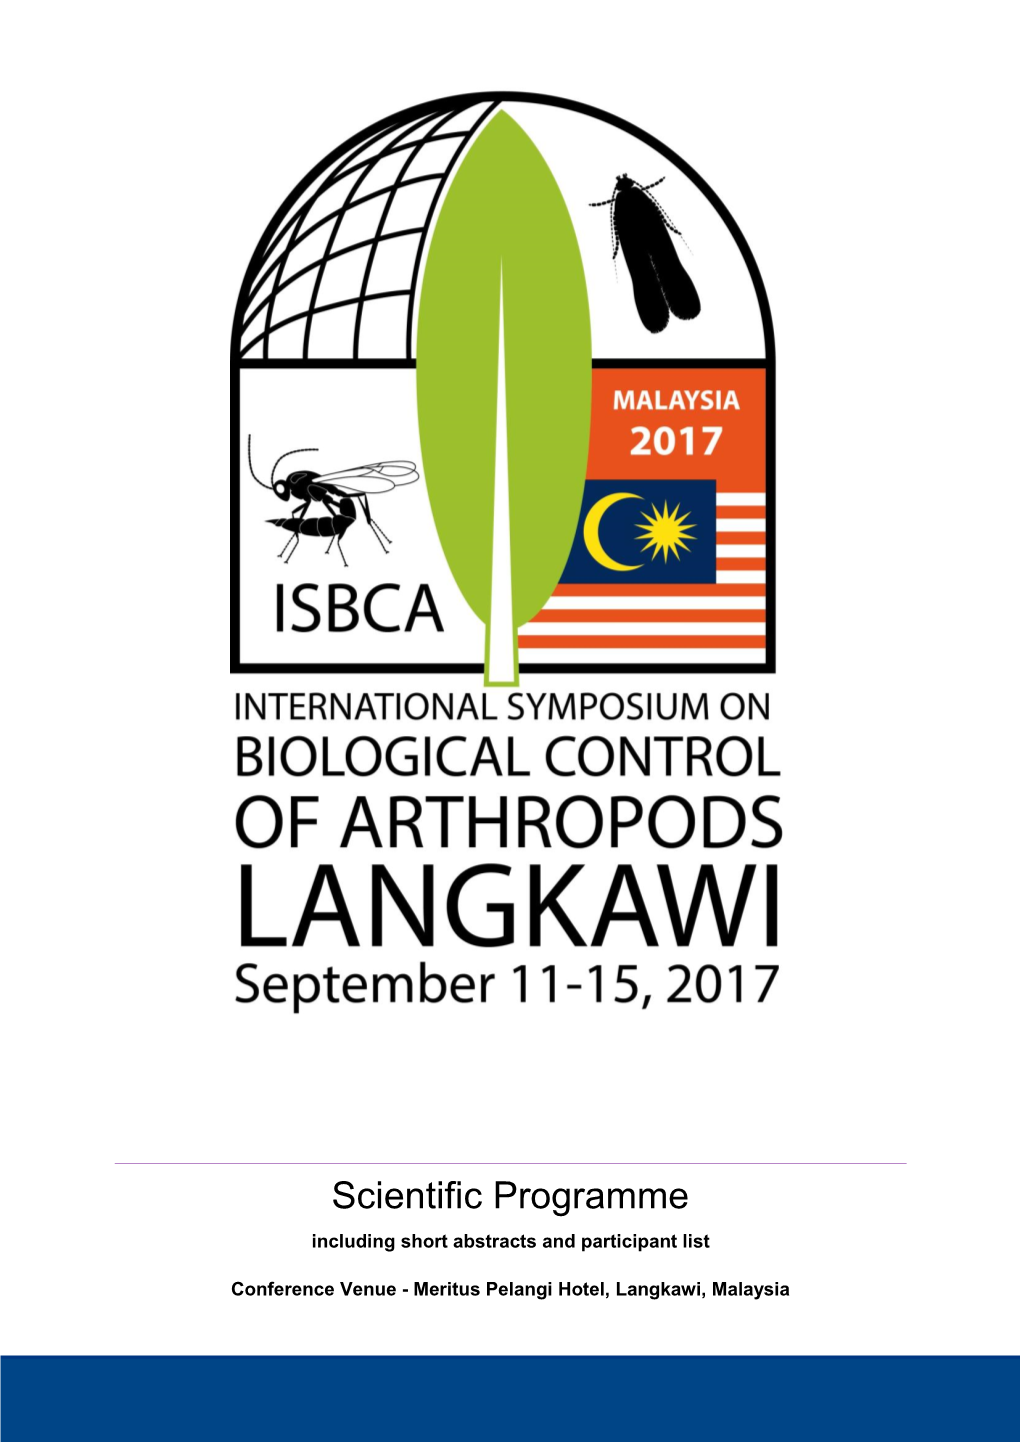 Scientific Programme Including Short Abstracts and Participant List